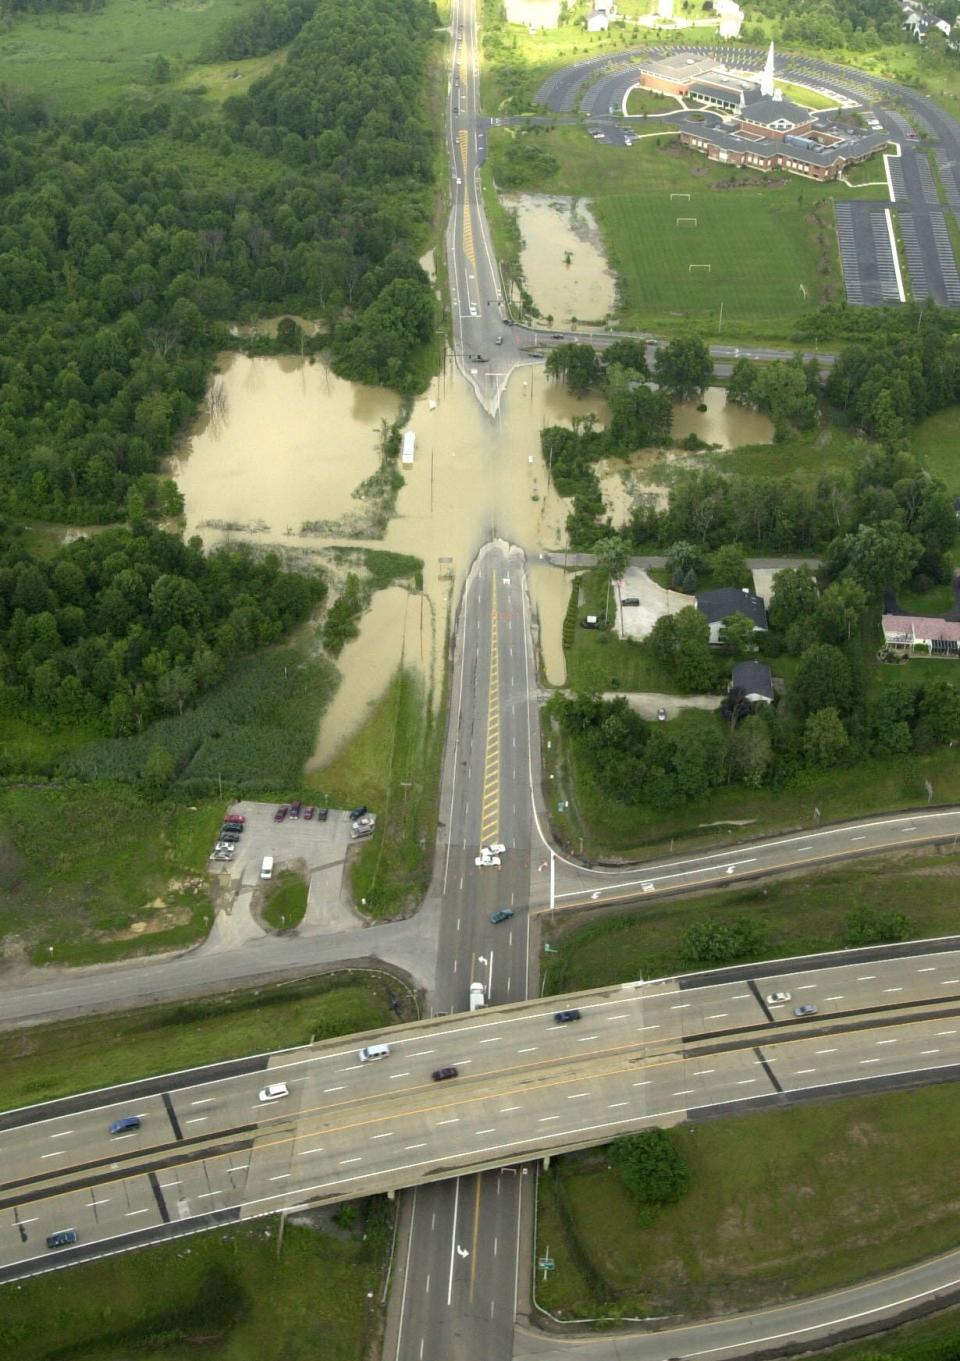 Flooding is seen on state Route 303 just east of the state Route 8 interchange onJuly 22, 2003.